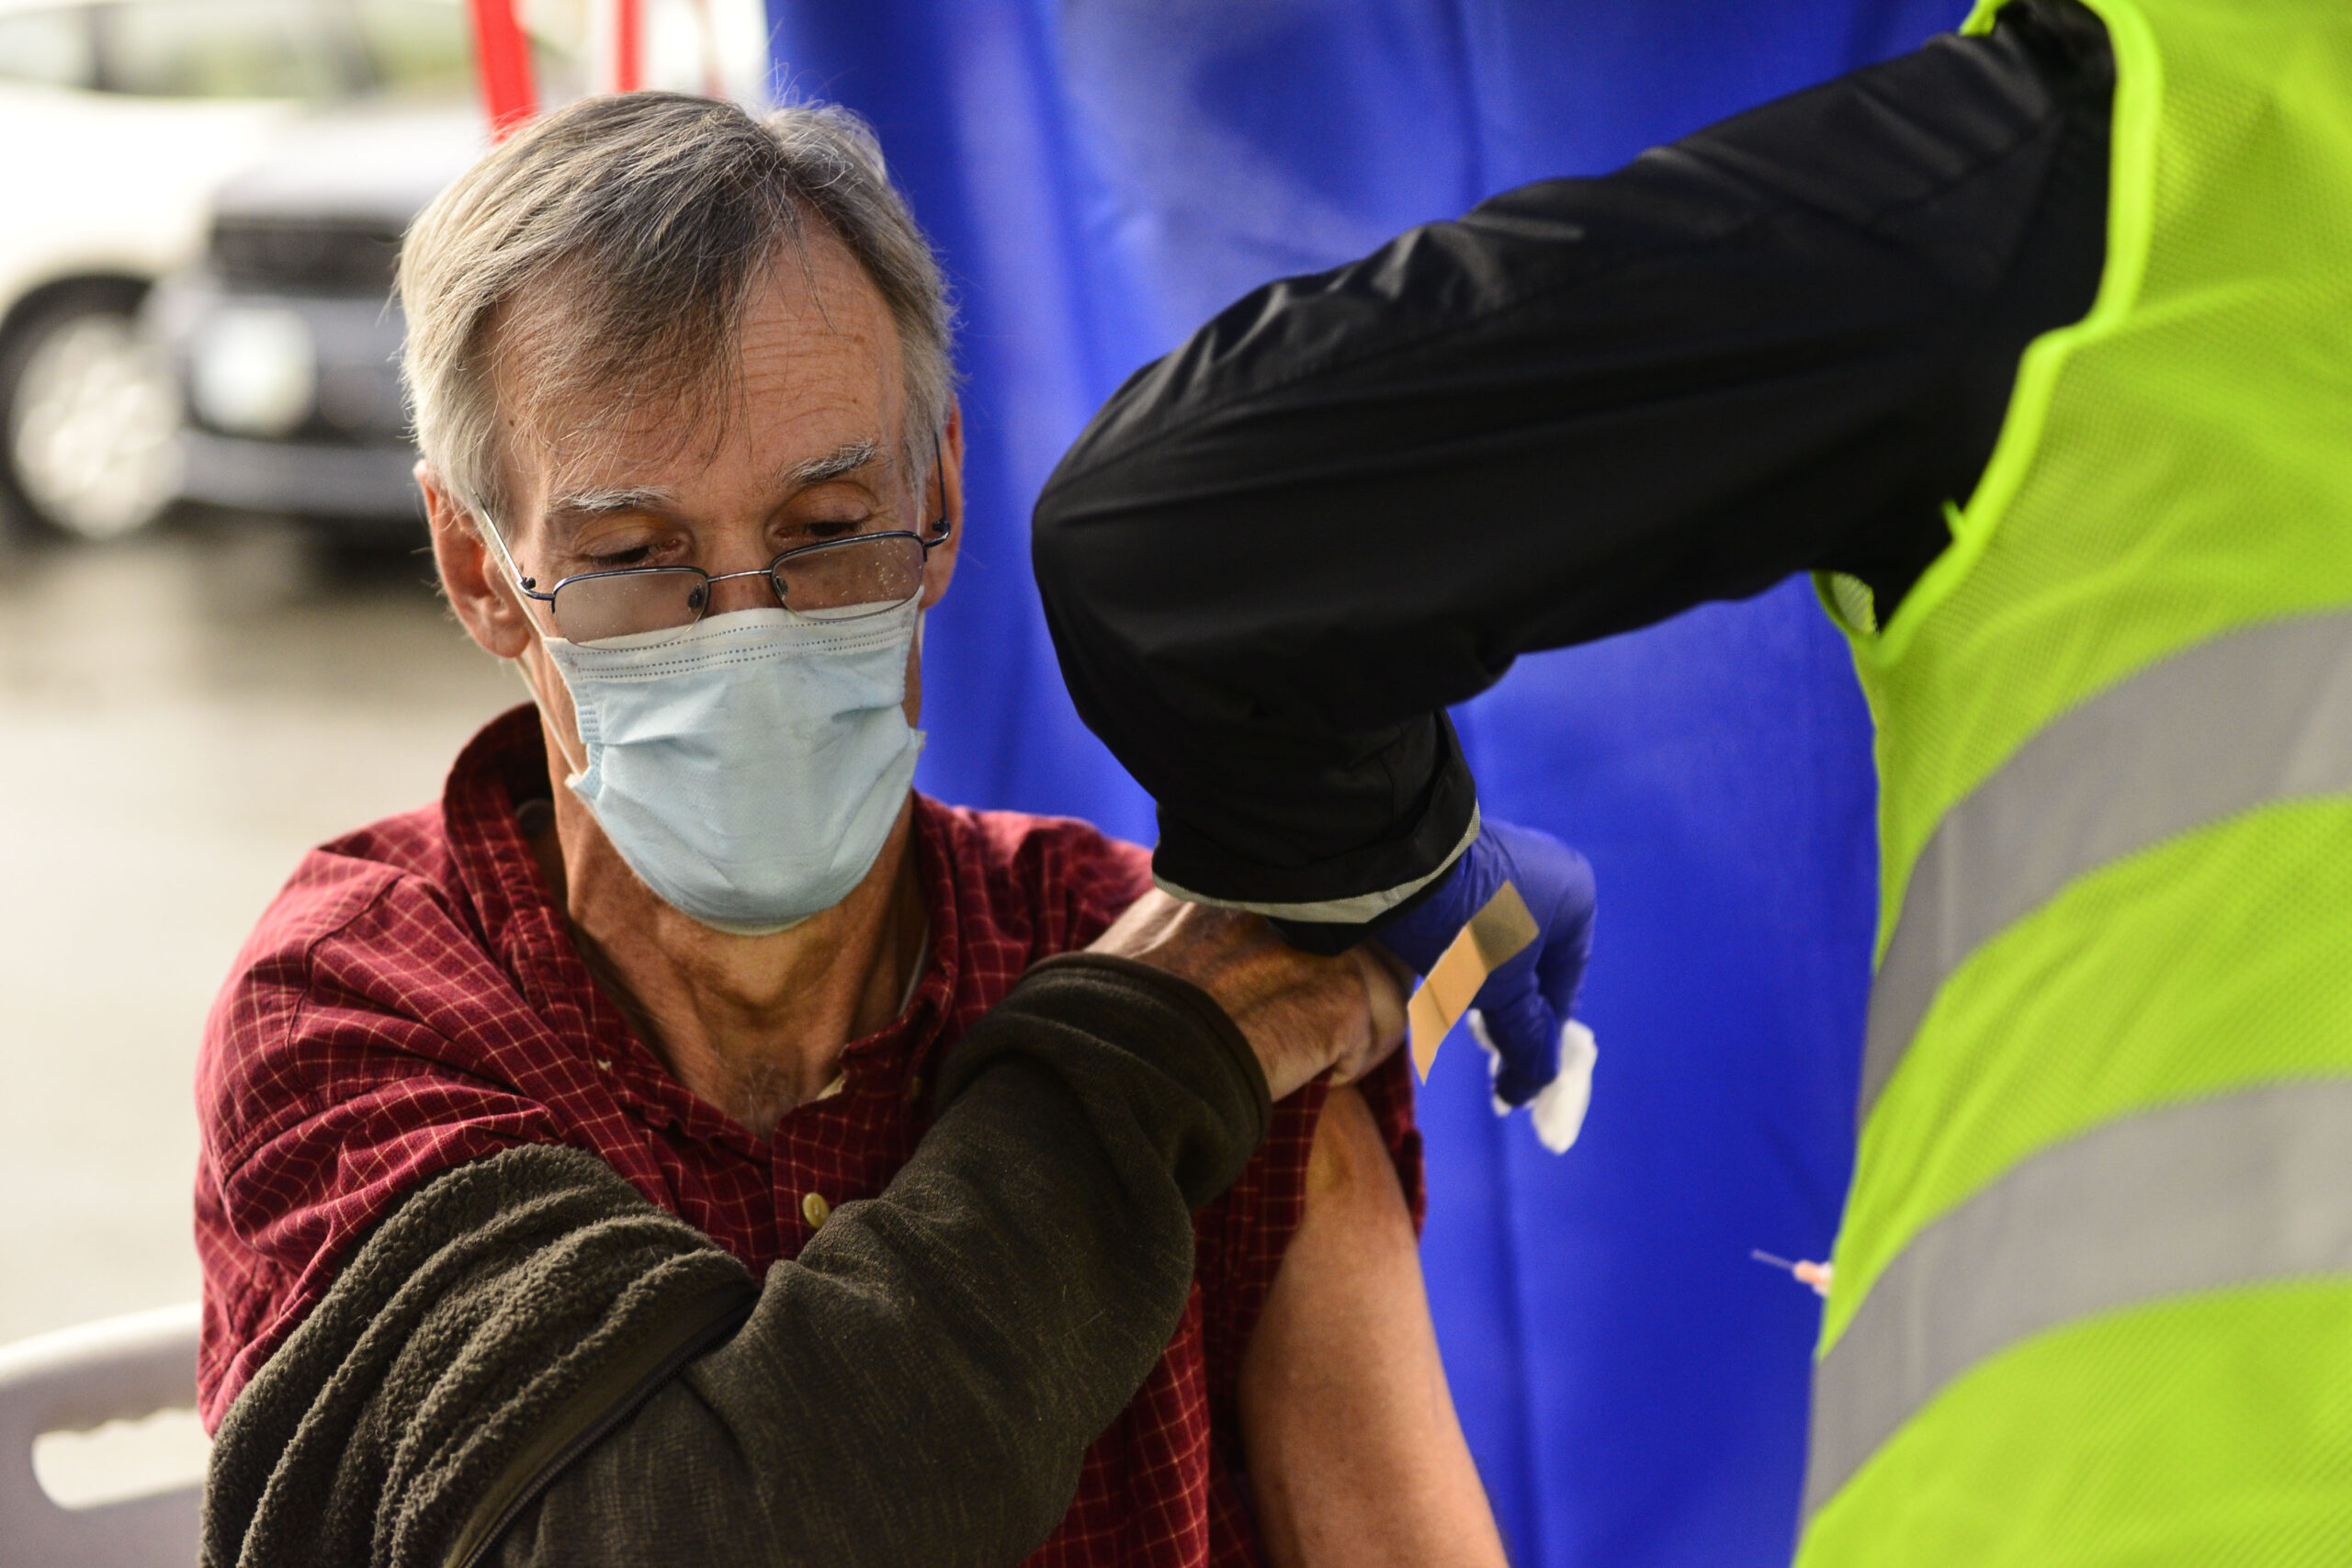 FILE - Crager Boardman, from Brattleboro, Vt., receives a shot at a flu vaccine clinic in Brattleboro on Tuesday, Oct. 26, 2021. On Wednesday, June 22, 2022, a federal advisory panel says Americans 65 and older should get newer, souped-up flu vaccines. The panel unanimously recommended certain flu vaccines for seniors, whose weakened immune systems don’t respond as well to traditional shots. (Kristopher Radder/The Brattleboro Reformer via AP, File)